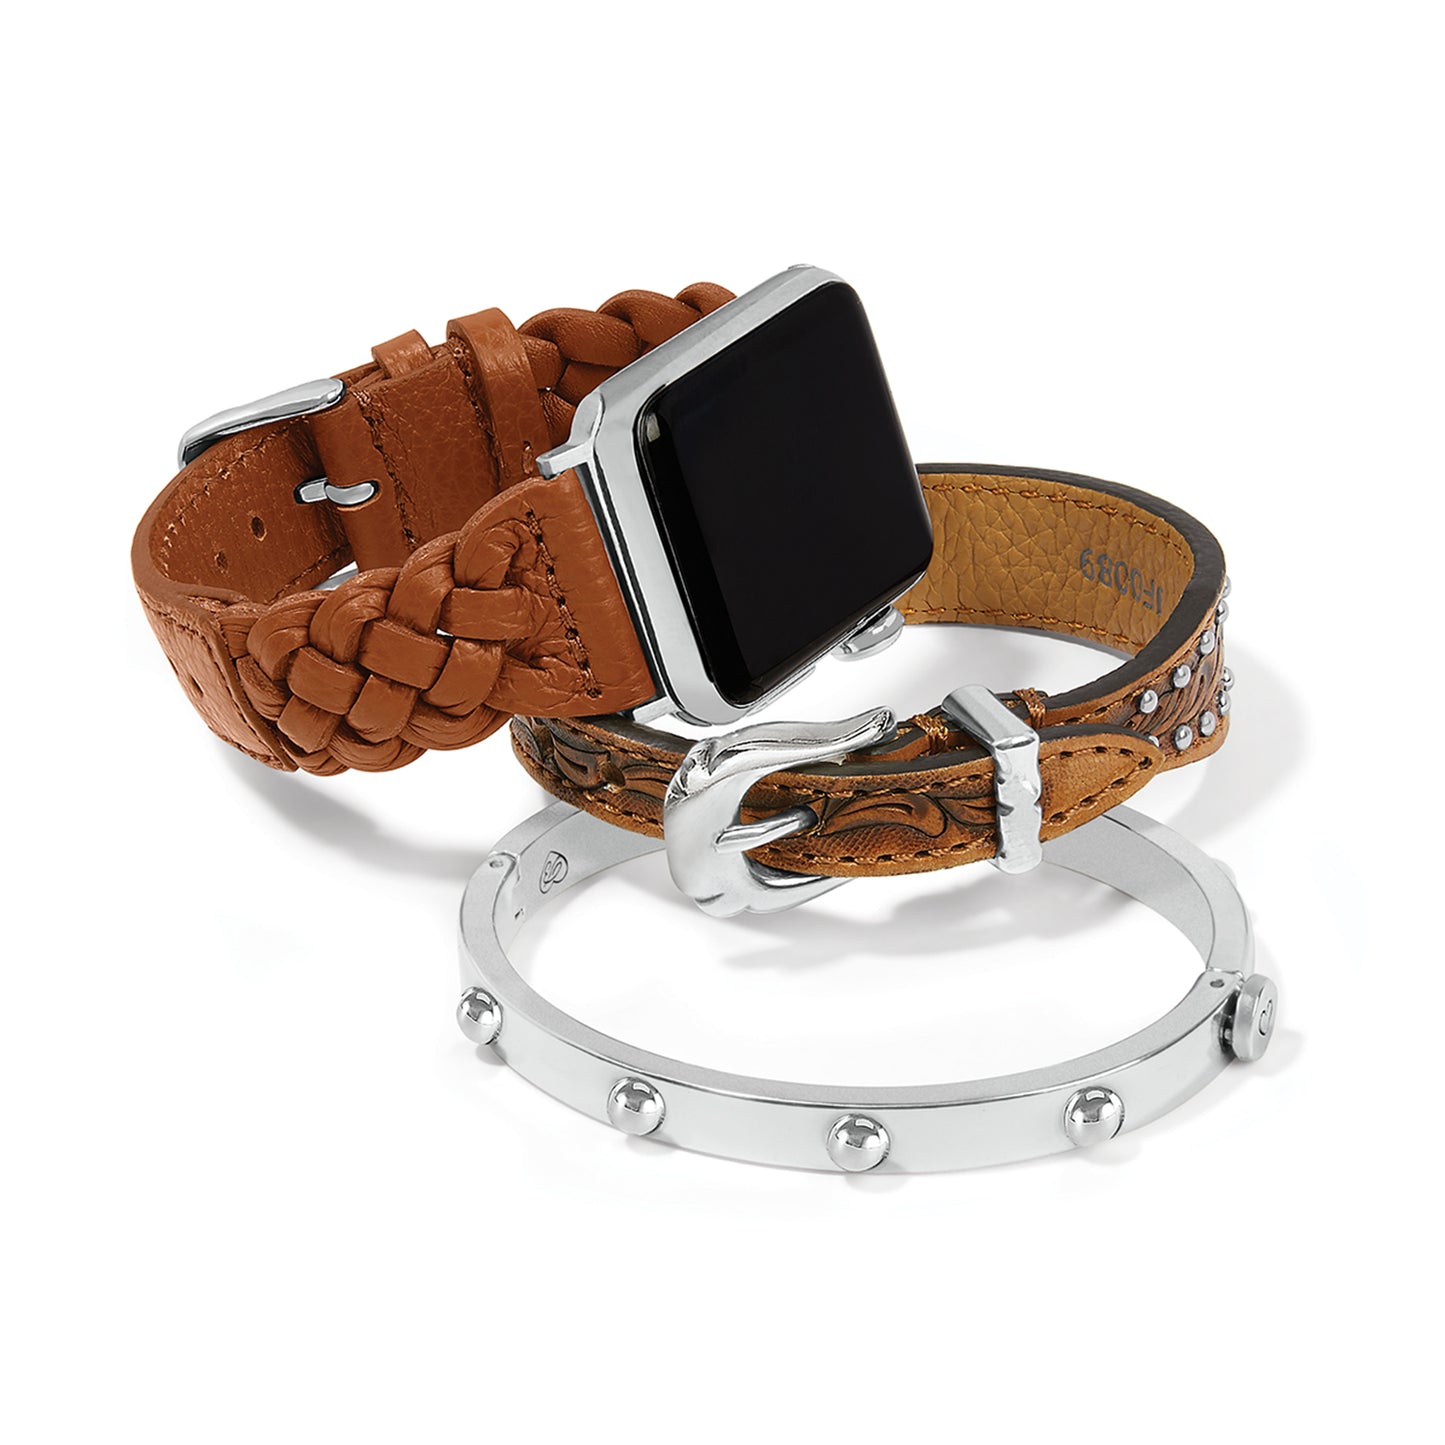 Sutton Braided Leather Watch Band: Luggage